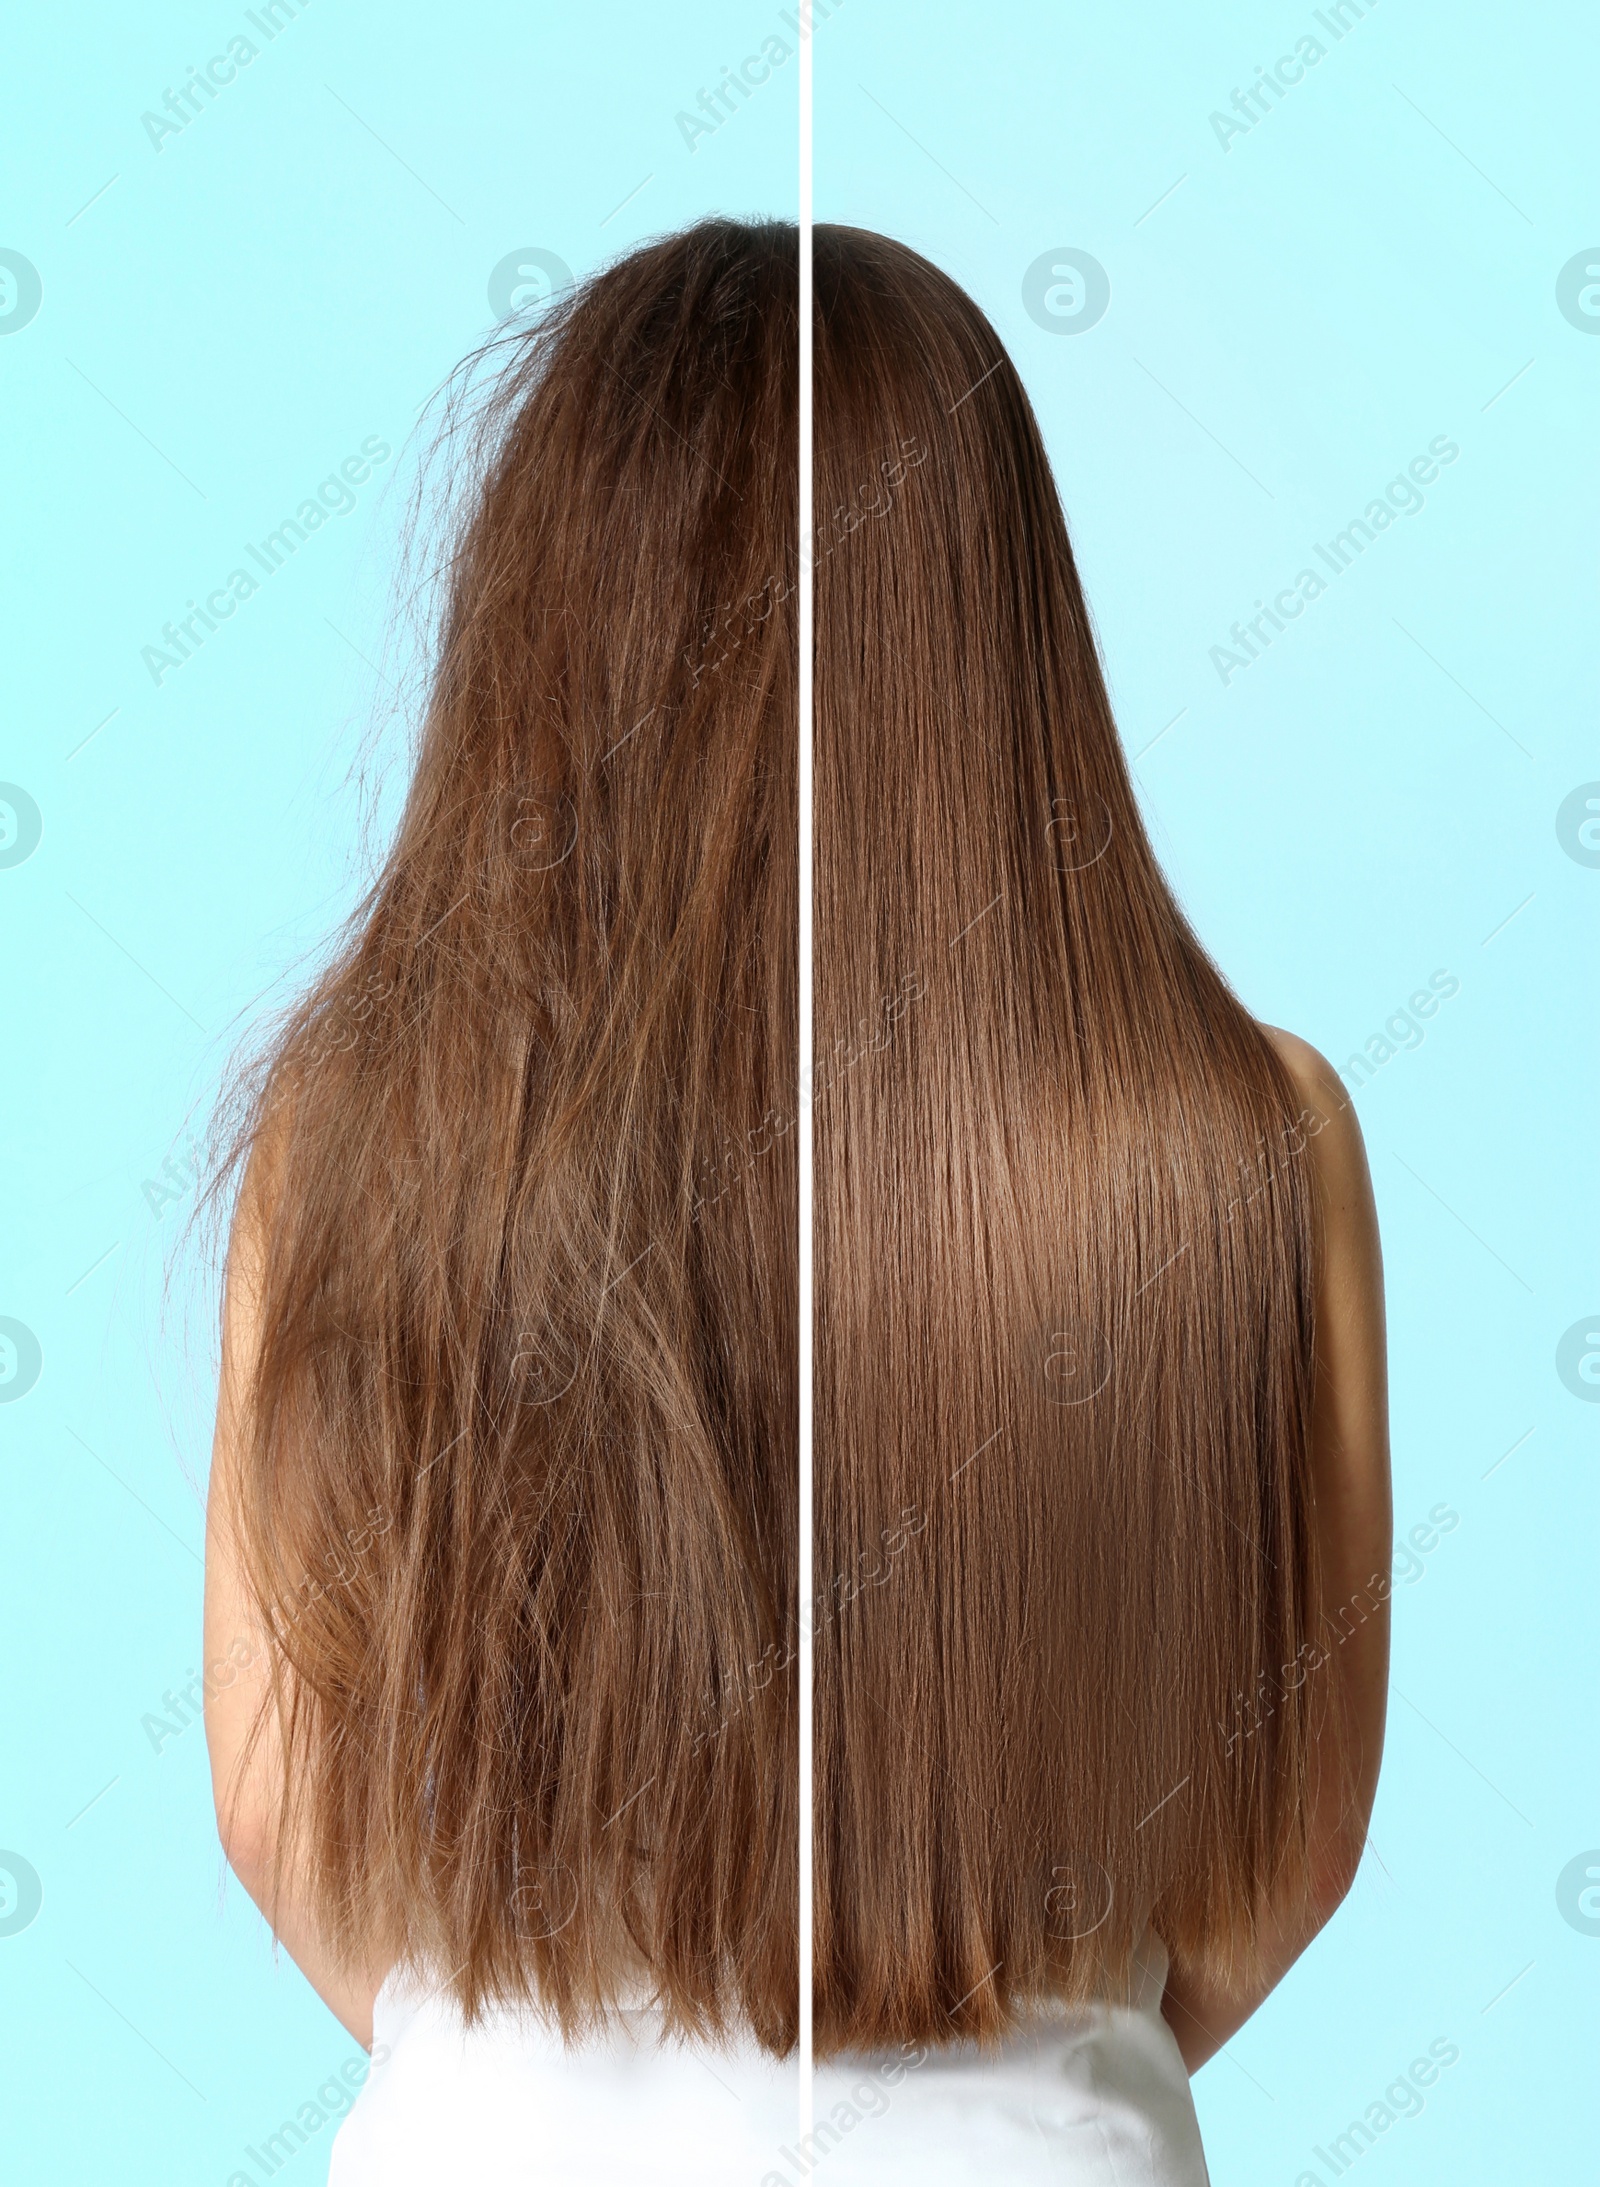 Image of Woman before and after washing hair with moisturizing shampoo on turquoise background, collage